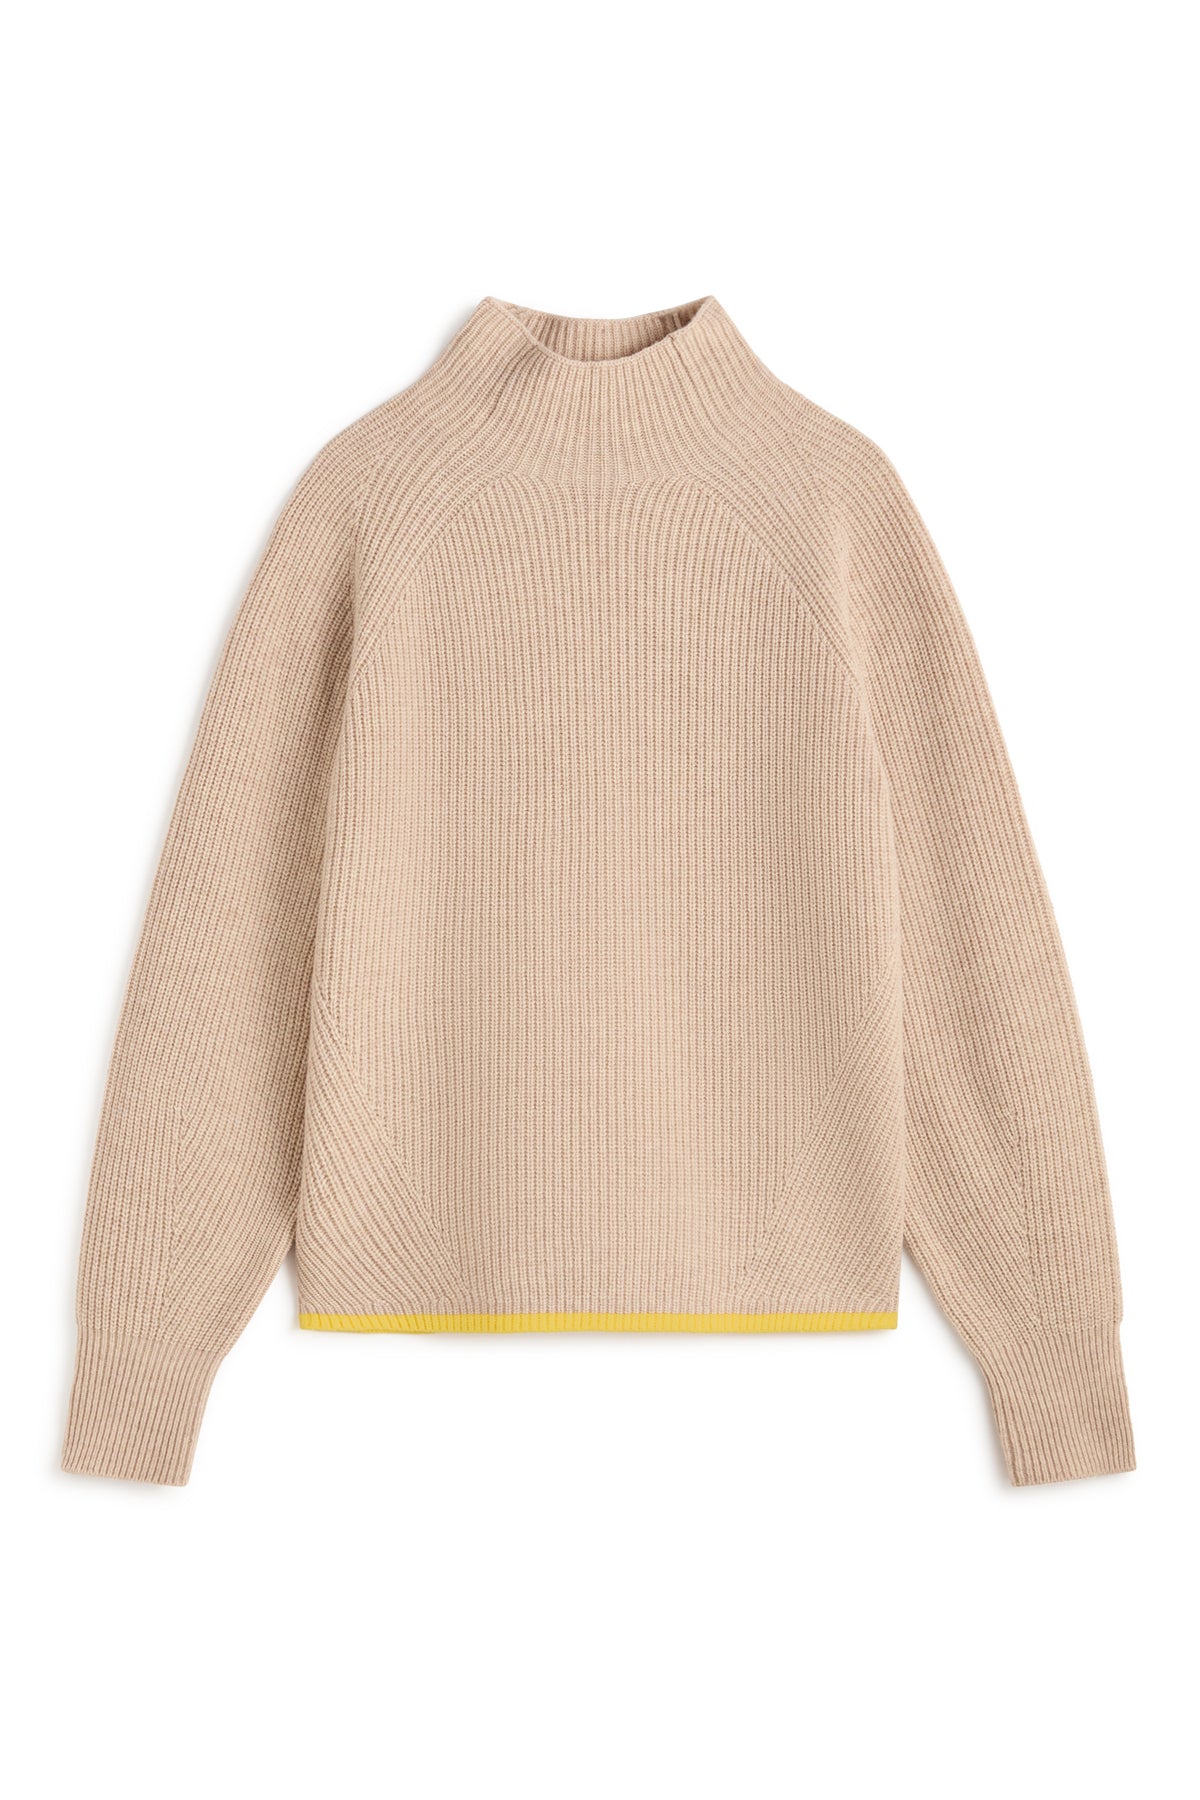 BROWN GINKO KNITTED JUMPER  